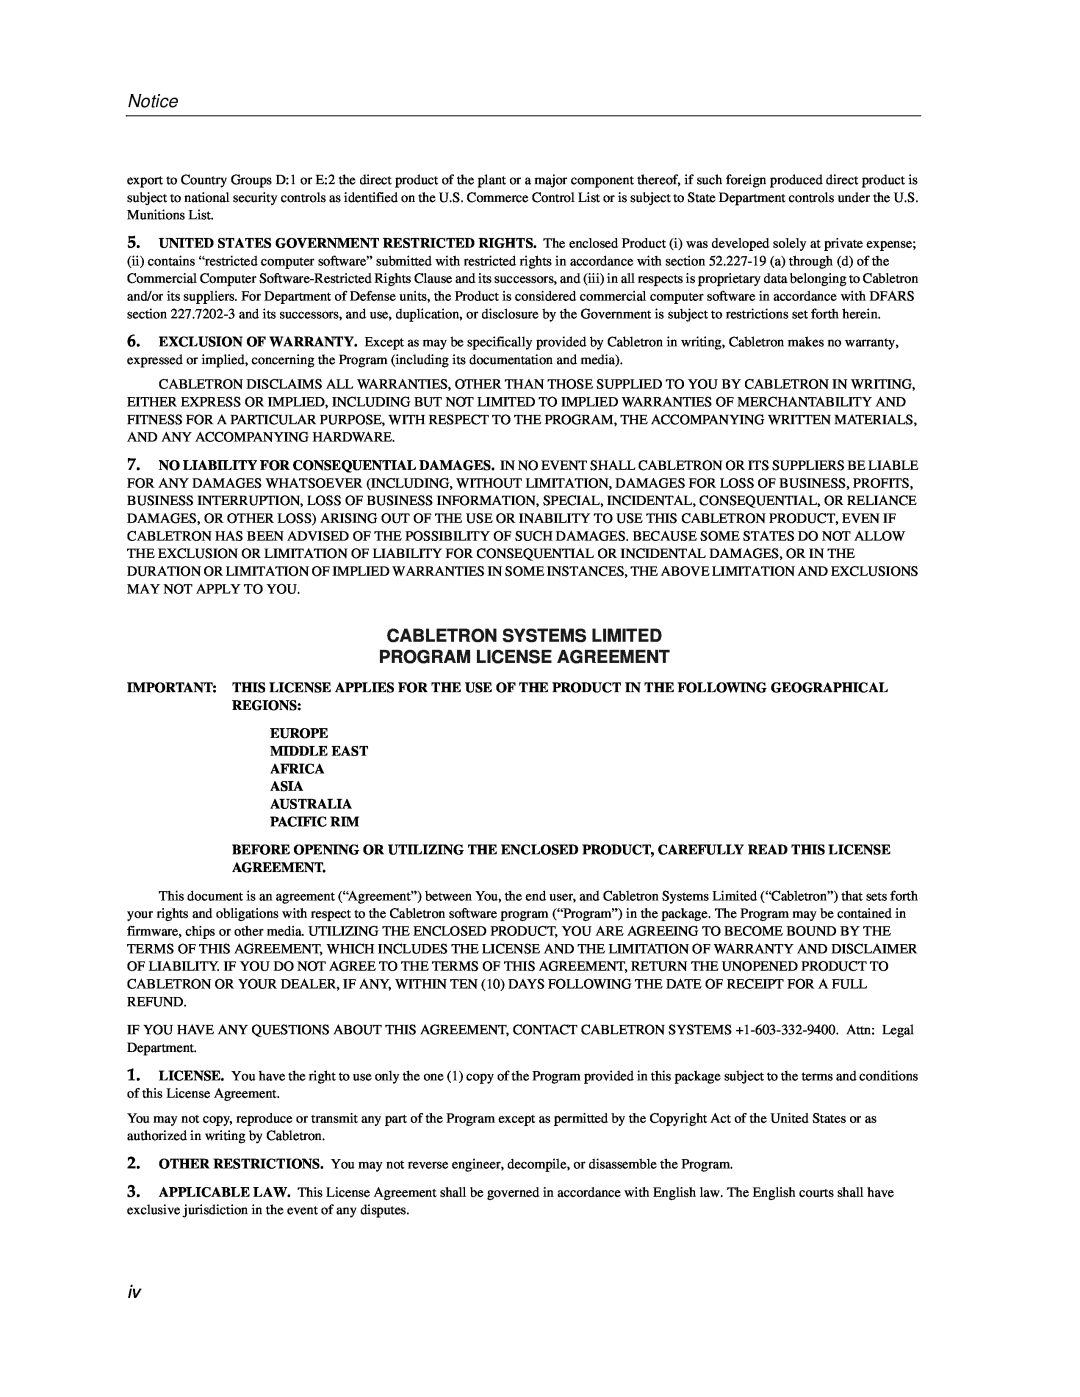 Cabletron Systems 9F120-08, 9F122-12, 9F125-0 manual Cabletron Systems Limited Program License Agreement 